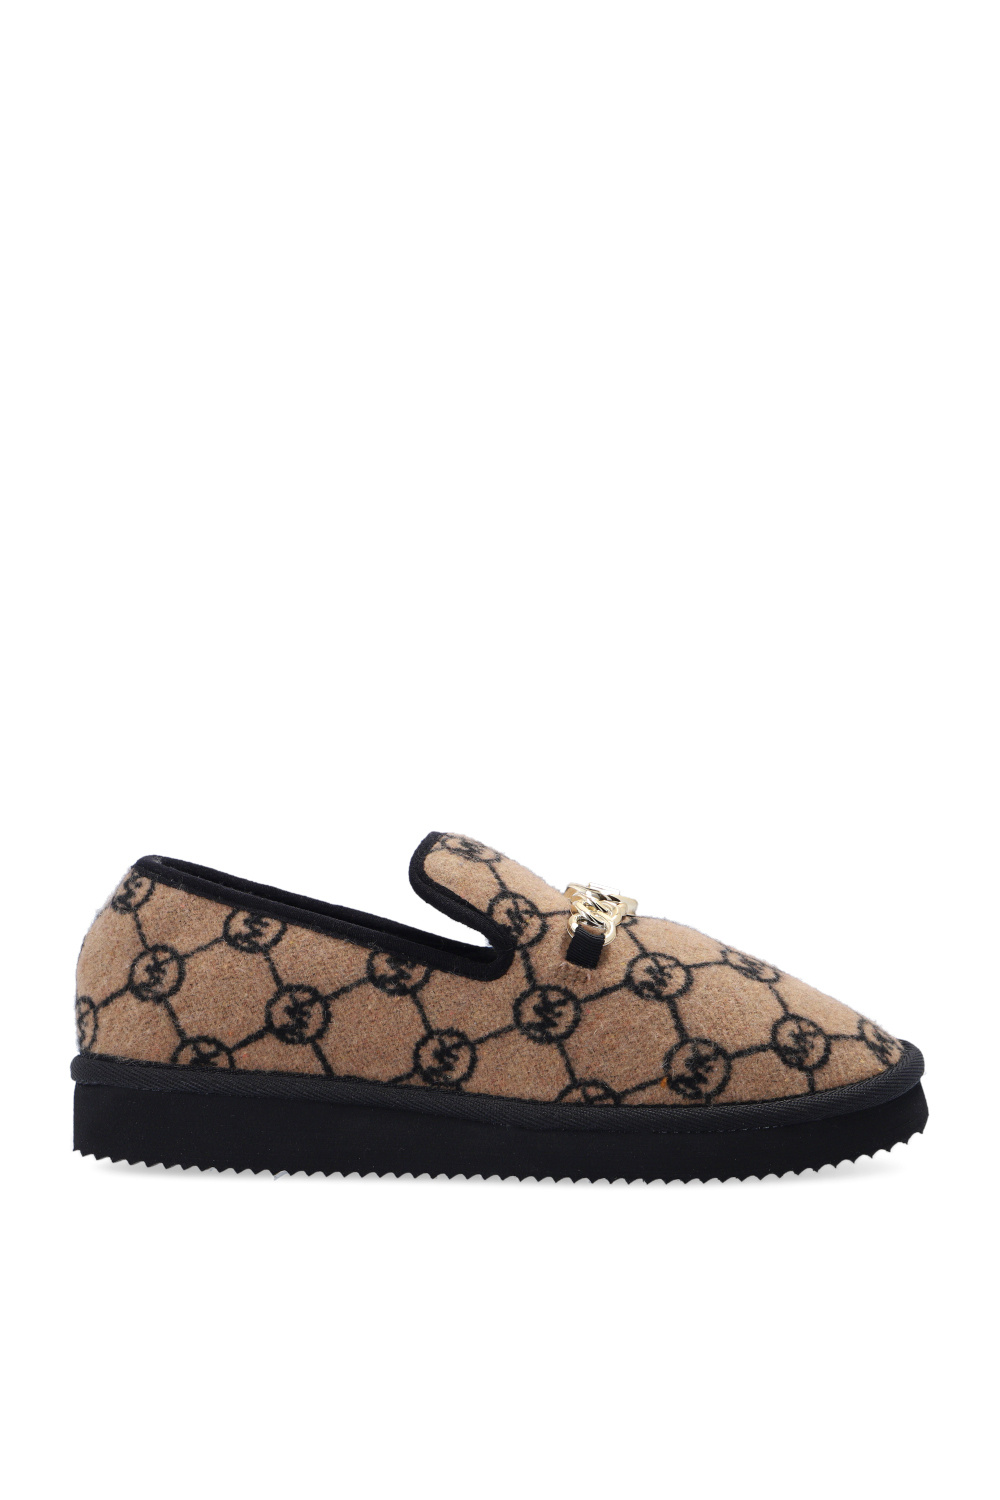 MICHAEL Michael Kors DASH TRAINER Brown  Free delivery  Spartoo NET    Shoes Low top trainers Women USD19000